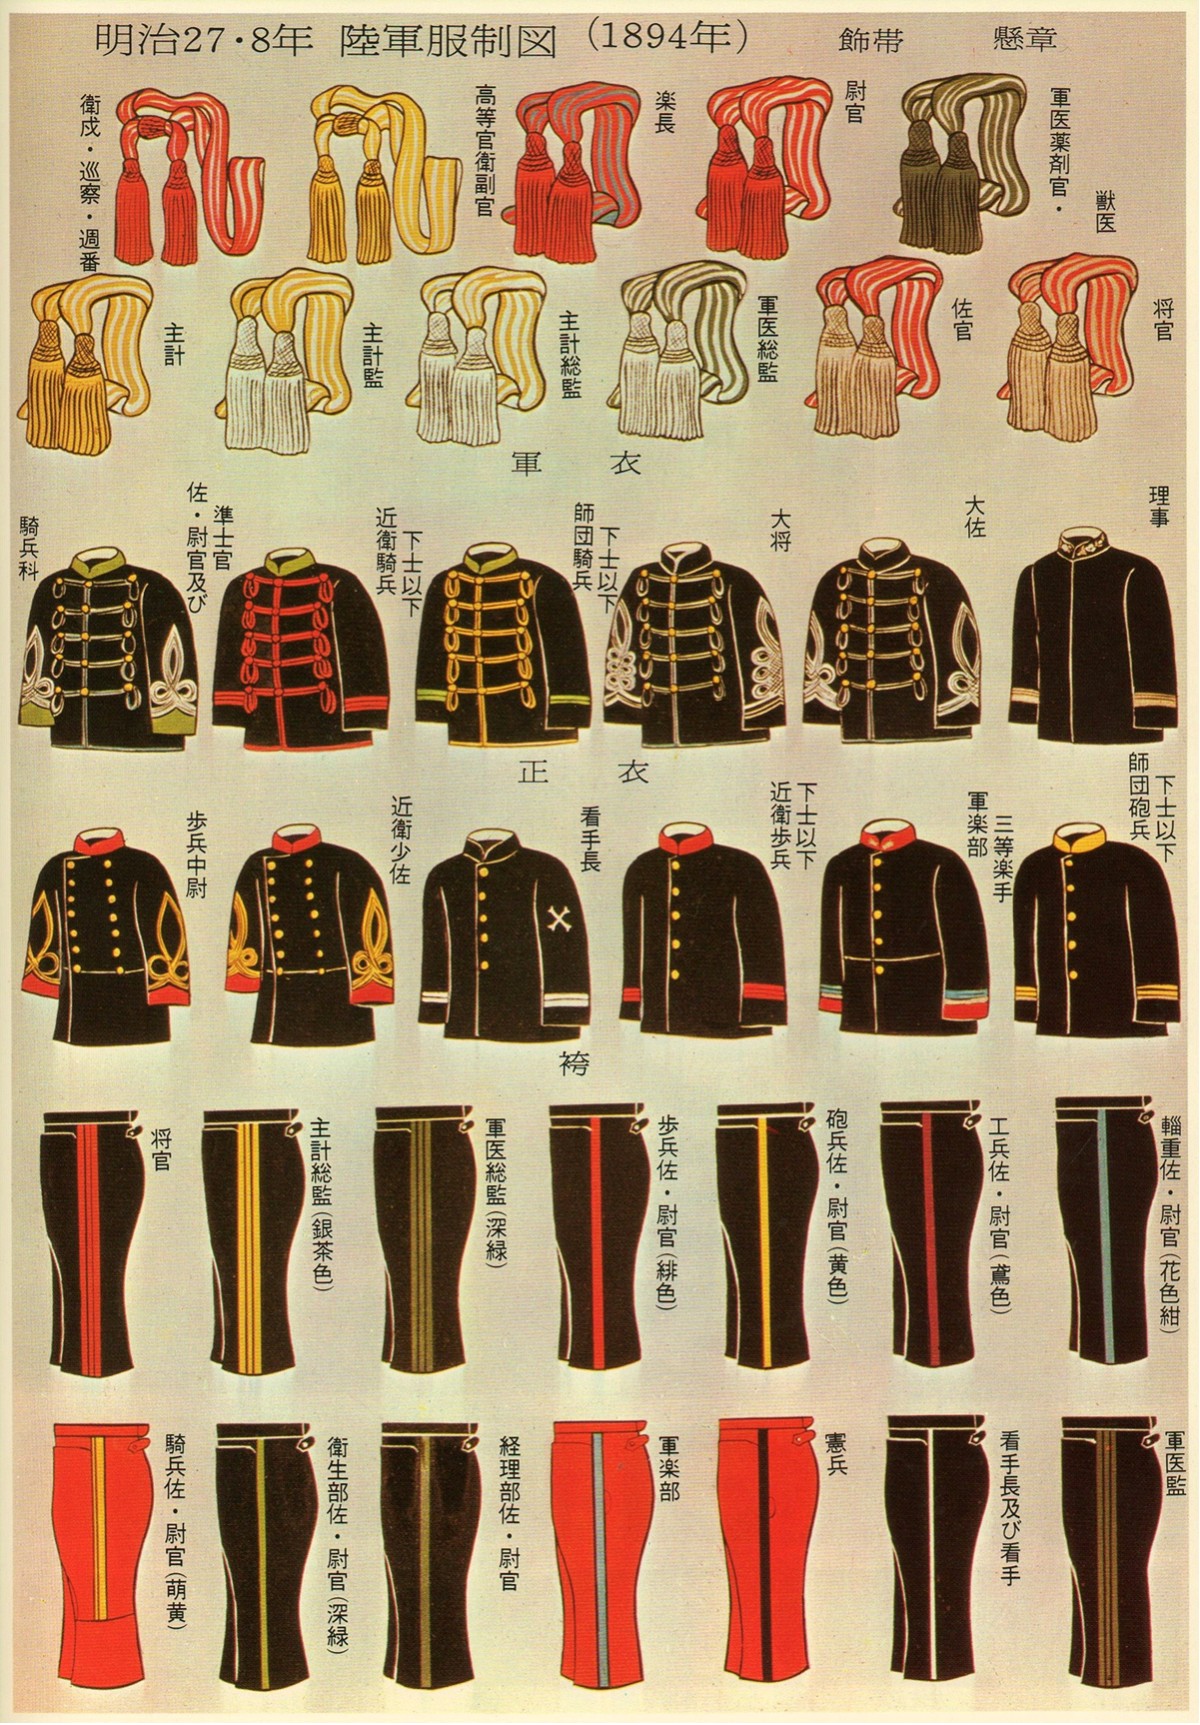 Japanese Imperial Army Uniform Plates 1894 Army Sashes and Uniforms.jpg